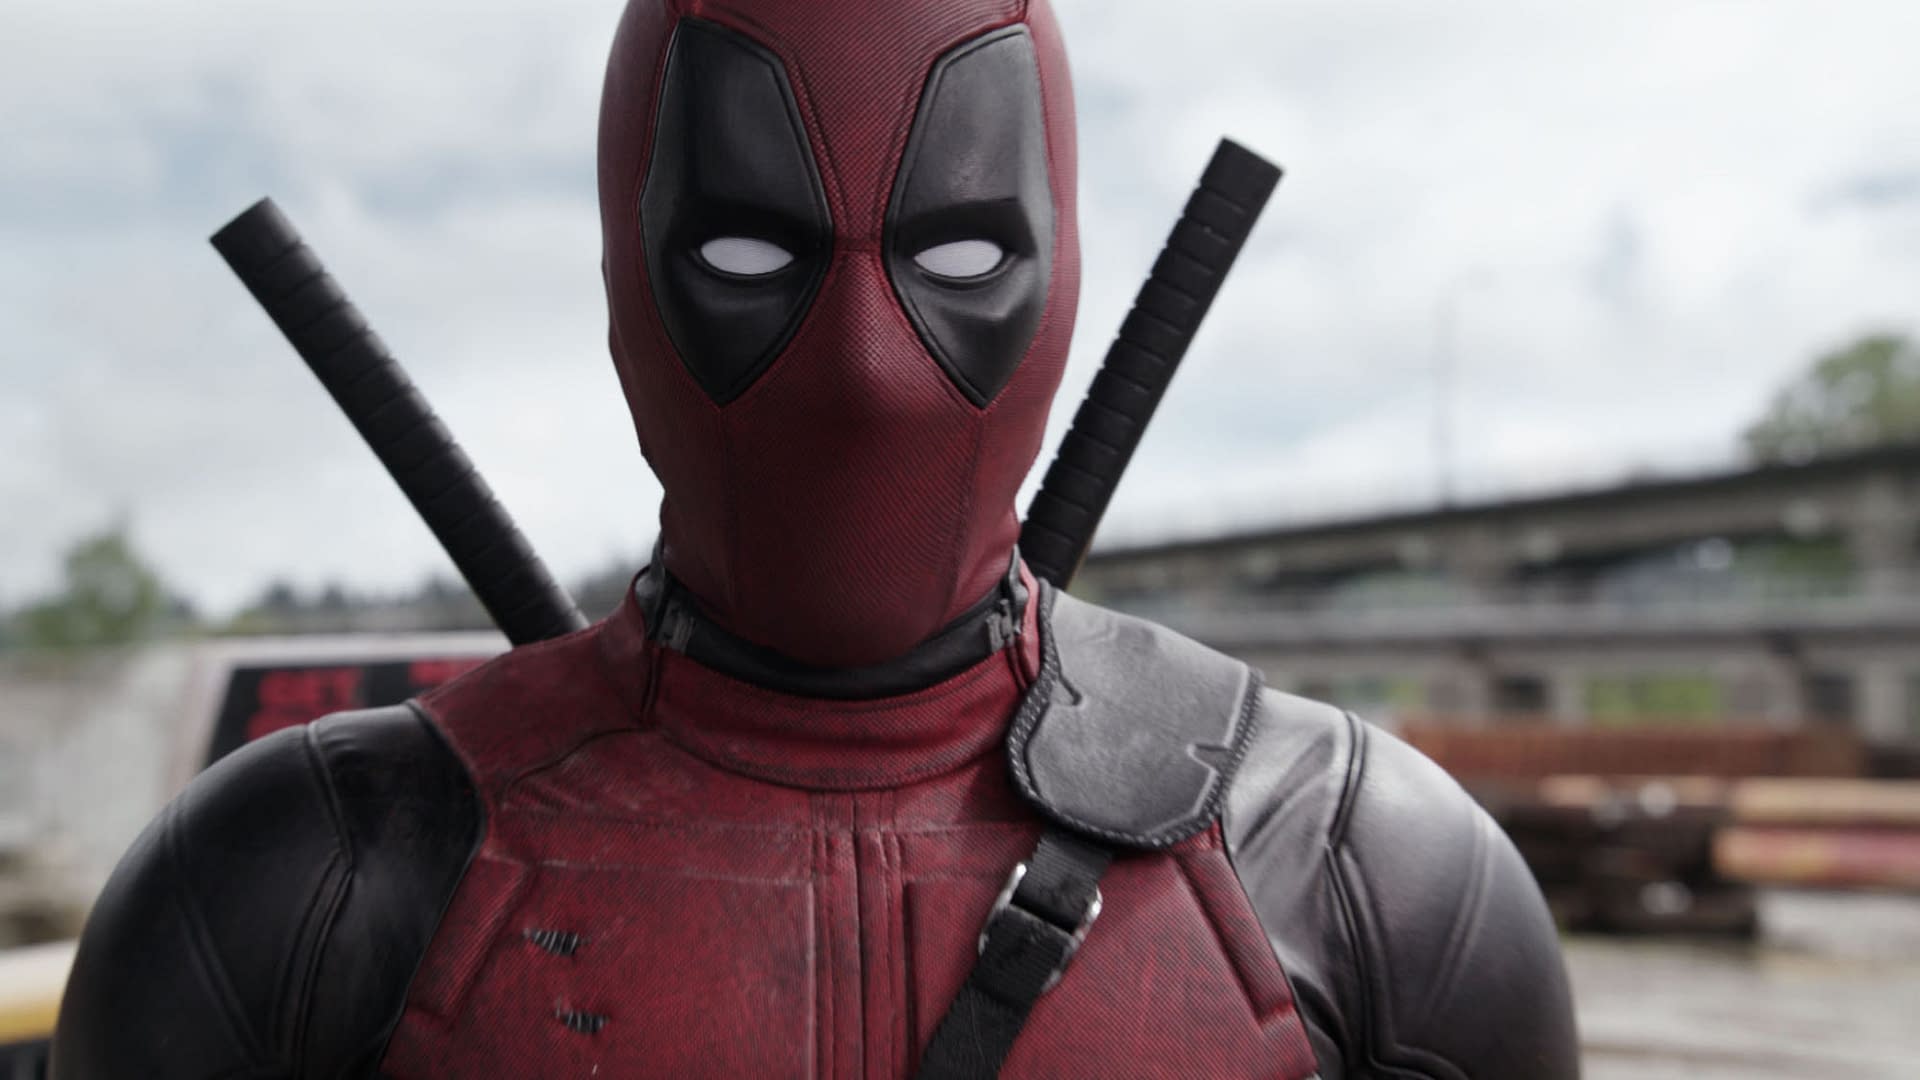 Deadpool slipped into the Marvel Cinematic Universe early, in an